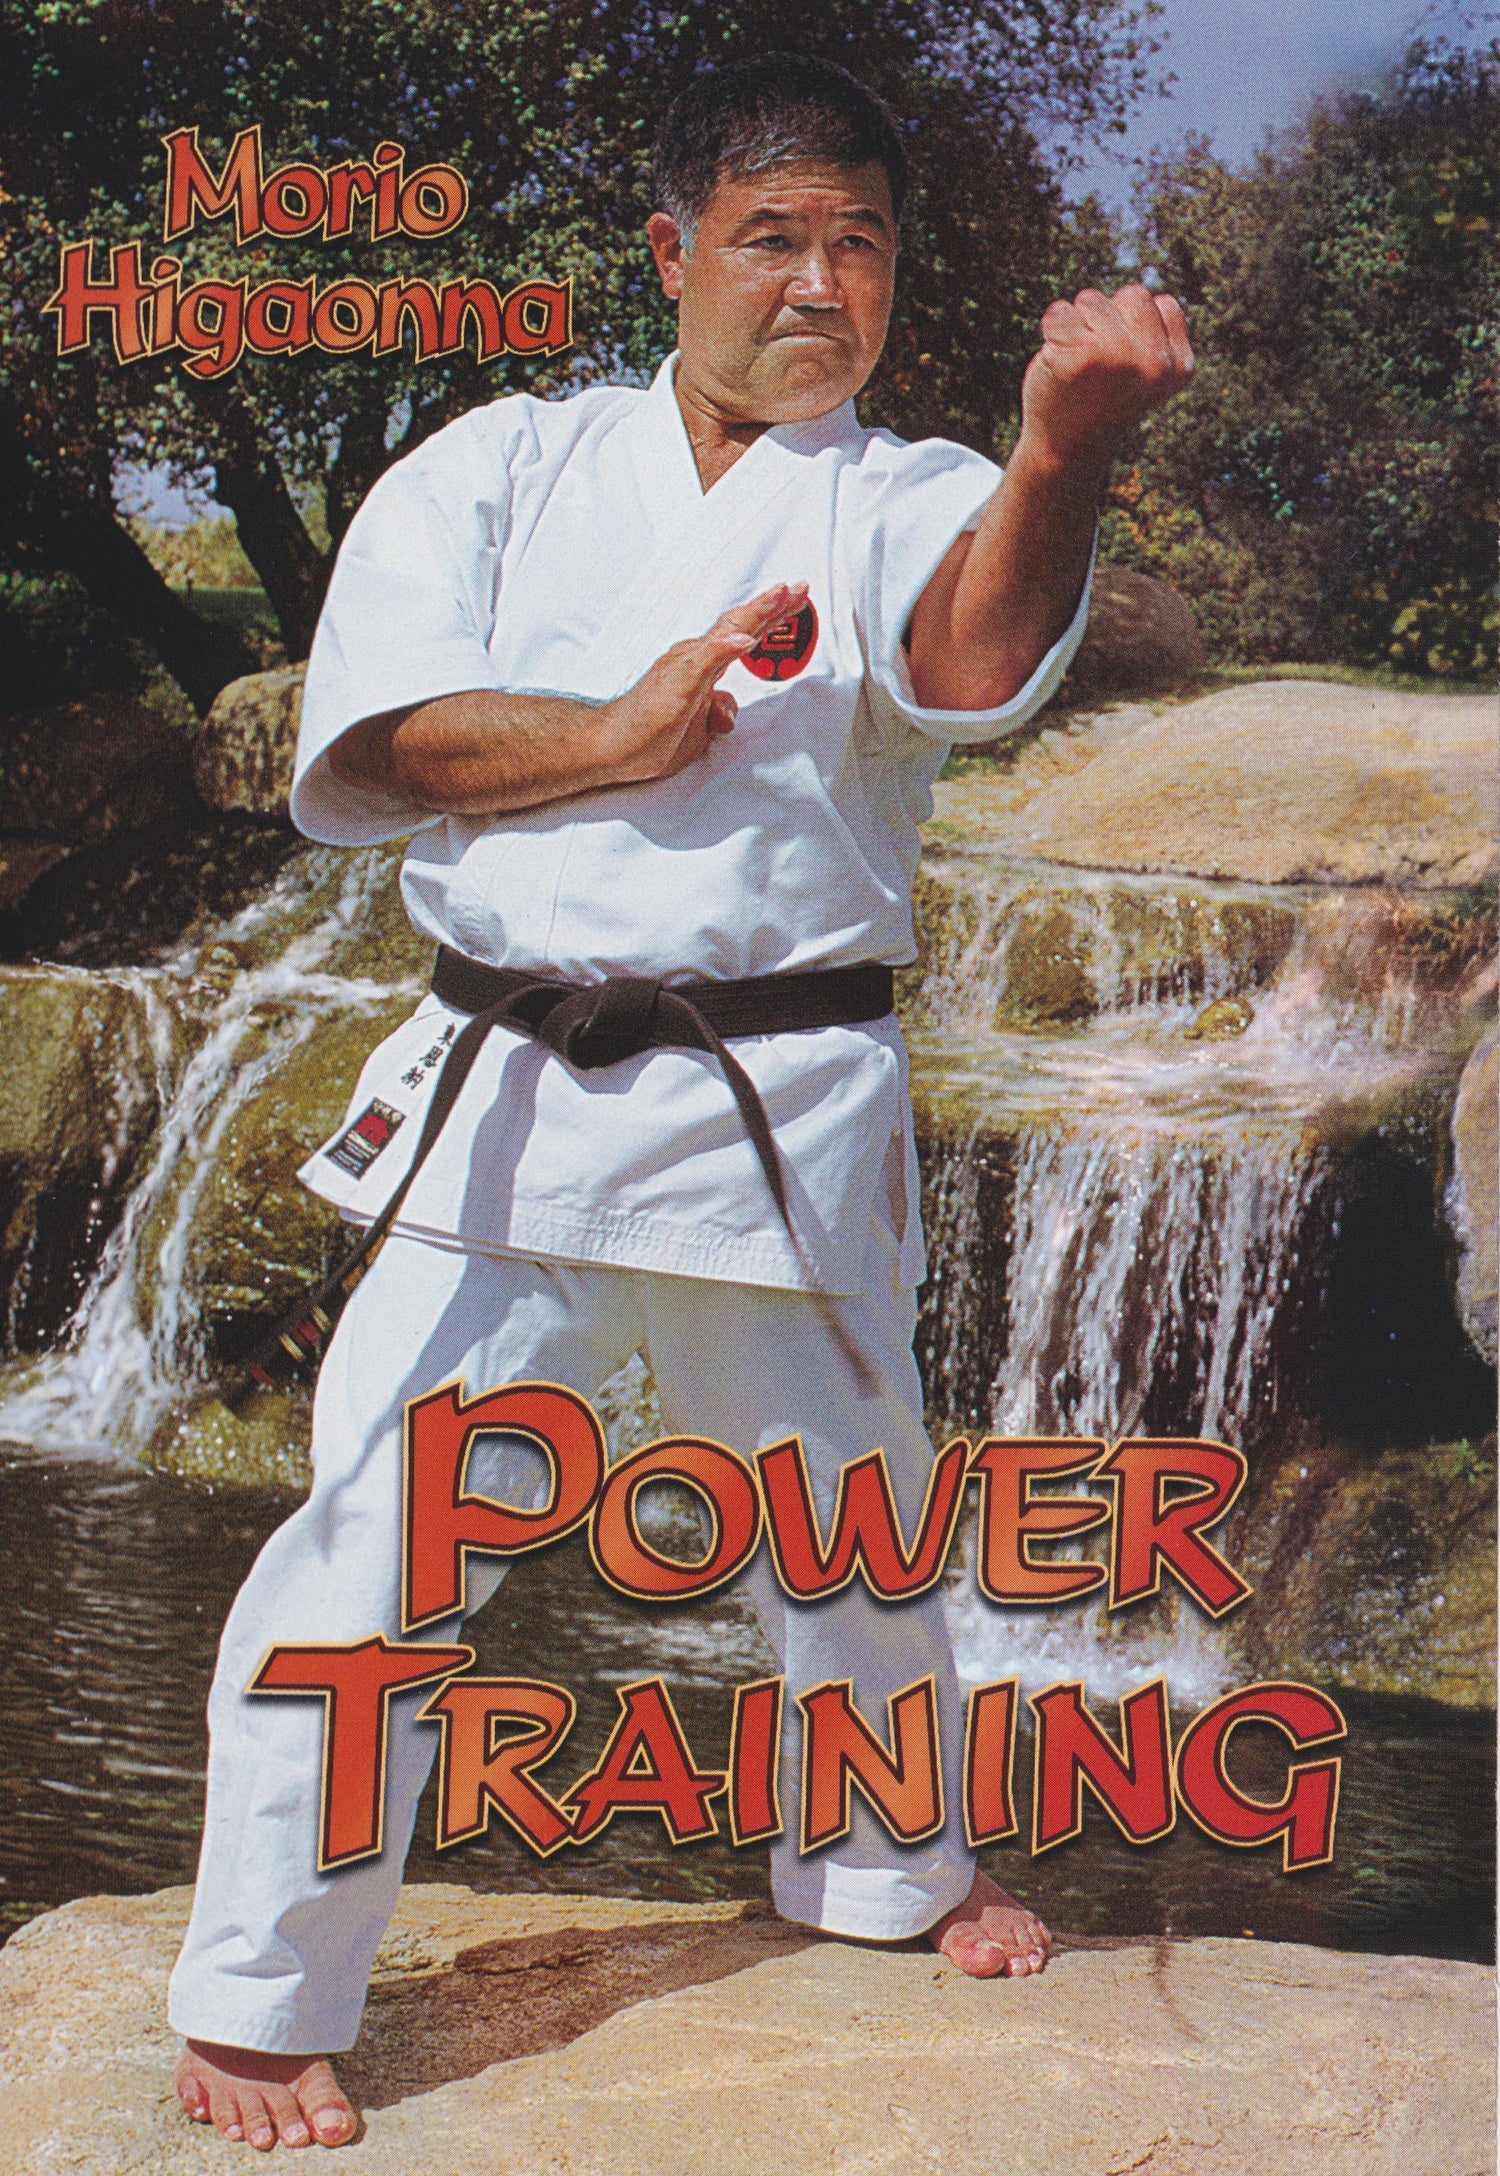 Power Training DVD by Morio Higaonna